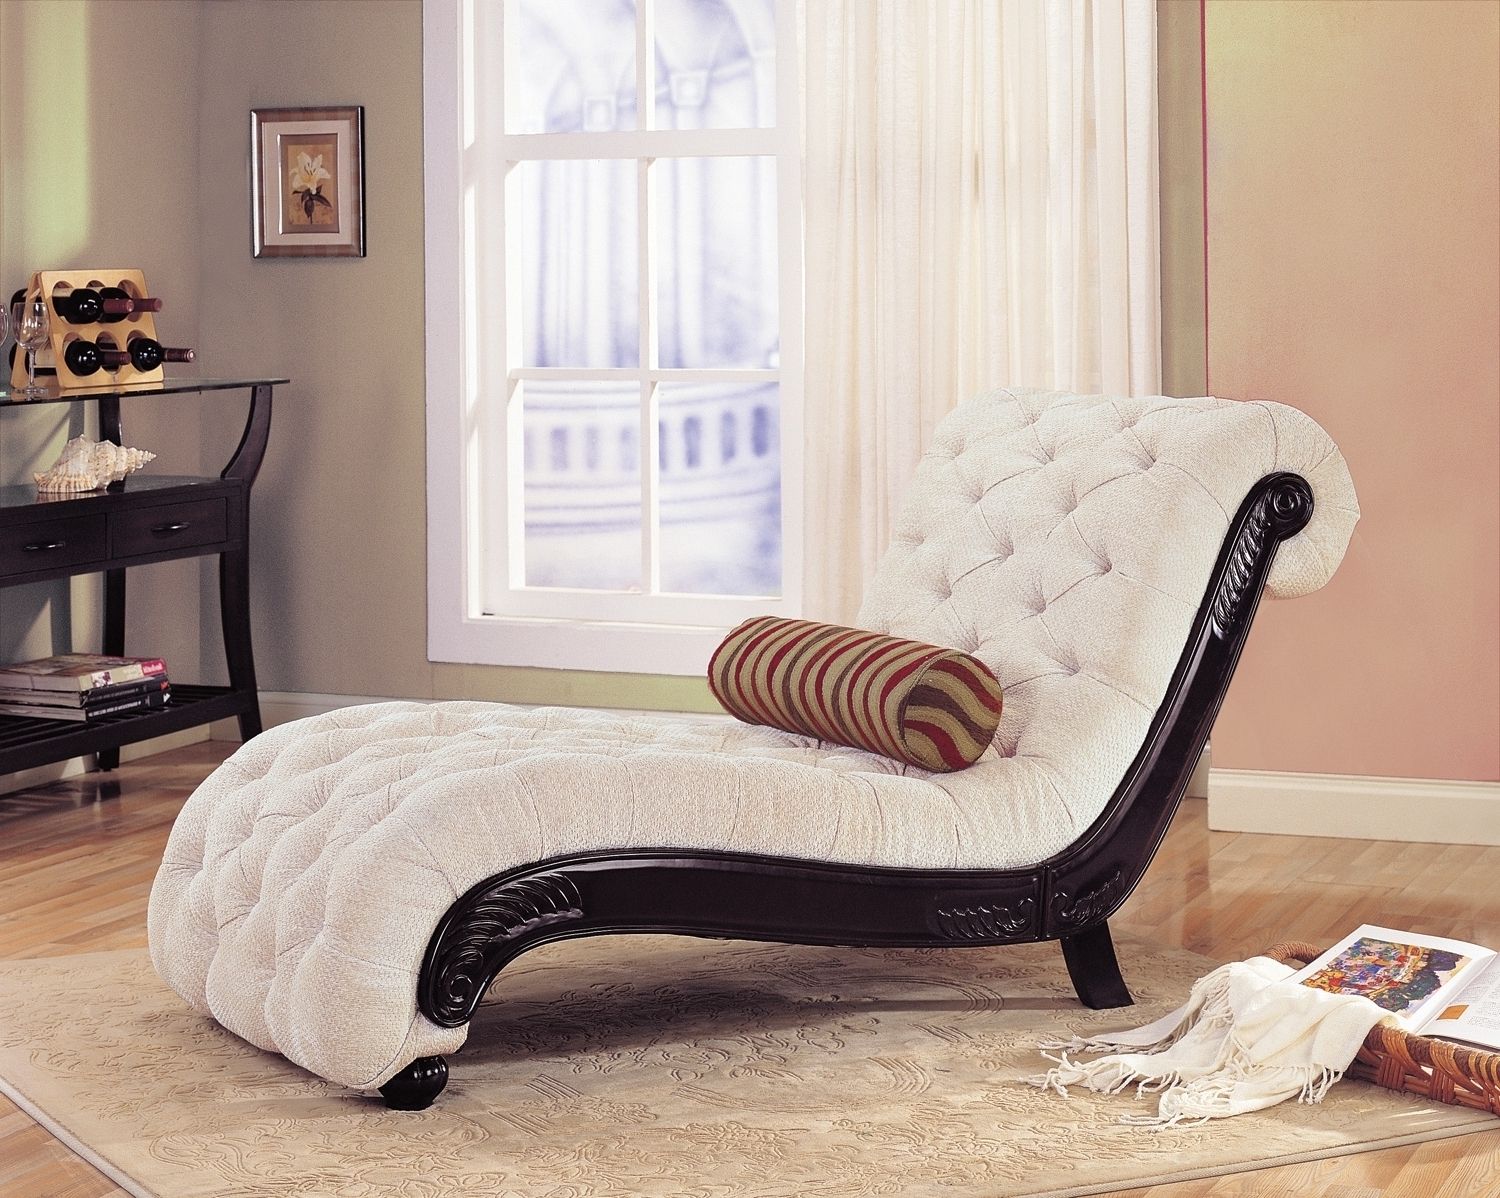 15 Best Chaise Lounge Chairs for Living Room